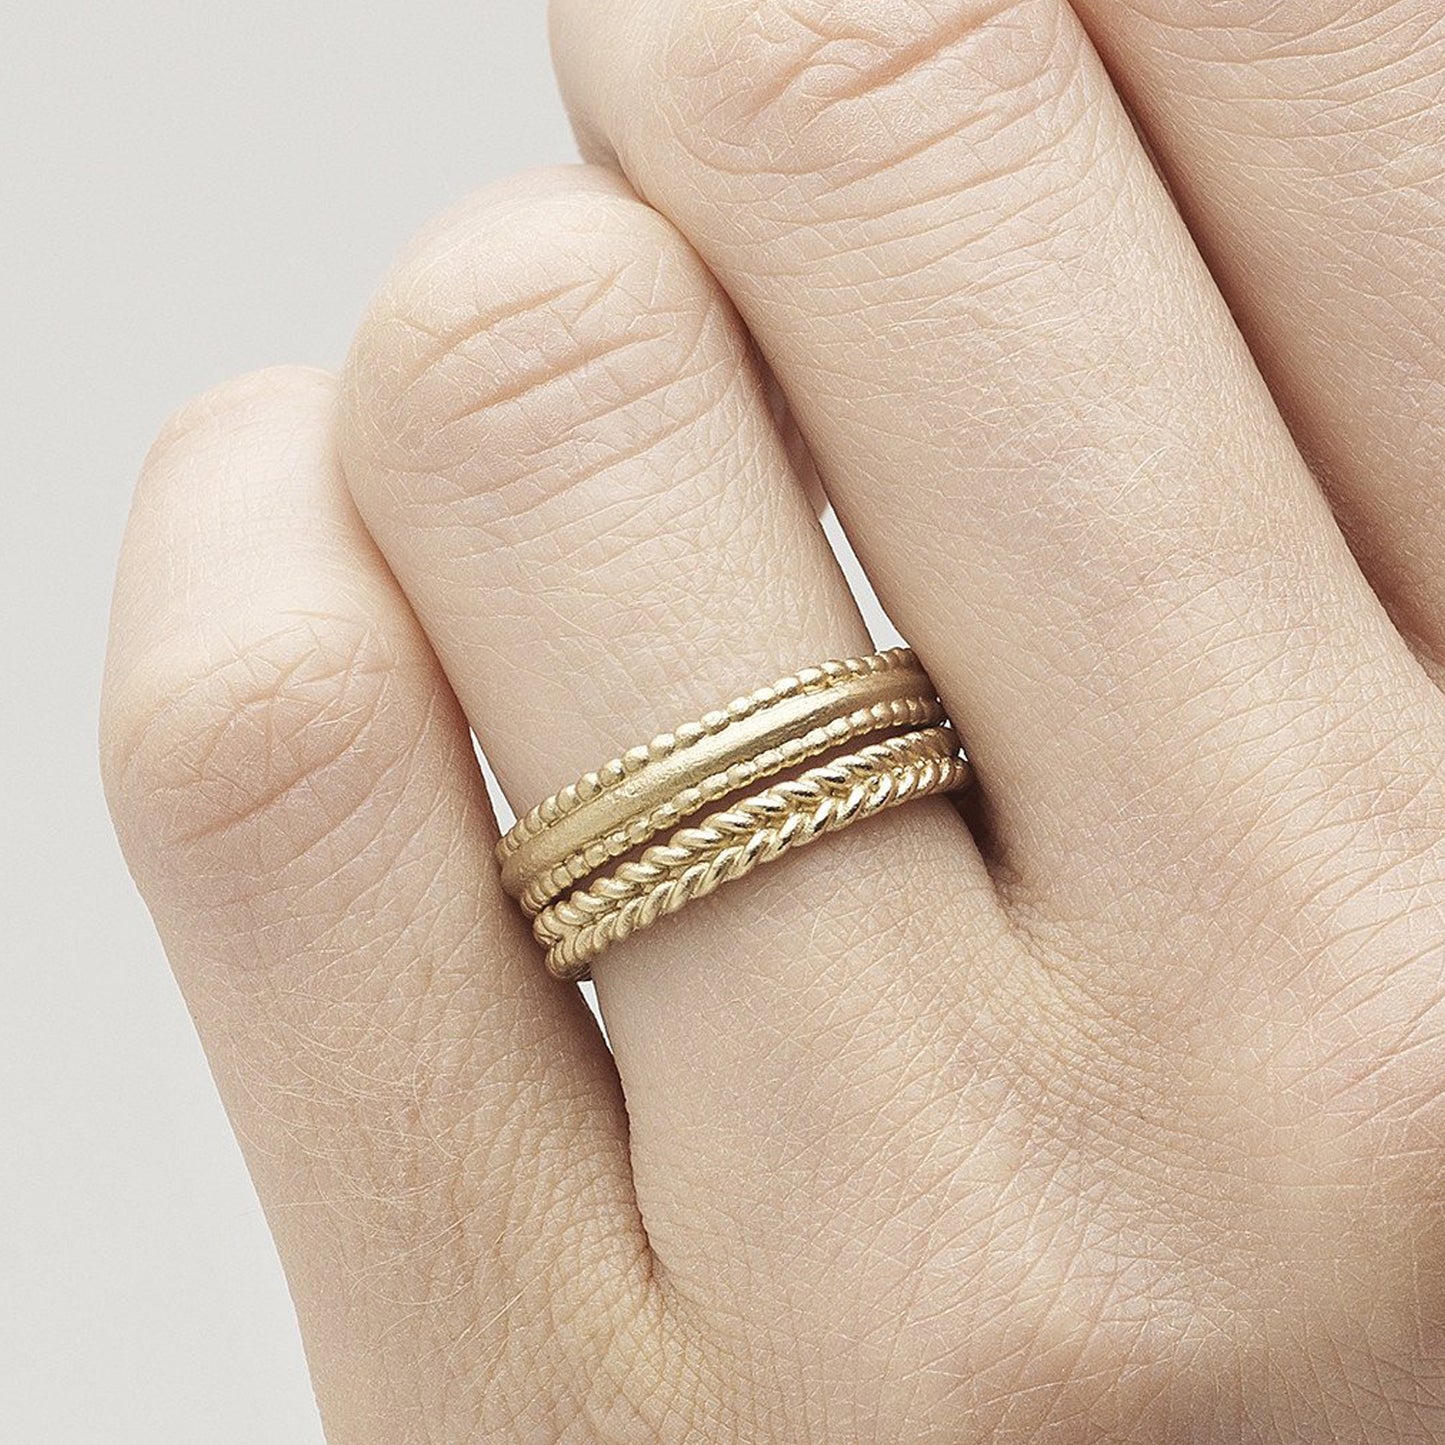  14ct brushed yellow gold Ruth Tomlinson double rope plaited band ring. Stacked with beaded edge band ring. Alternative wedding ring.